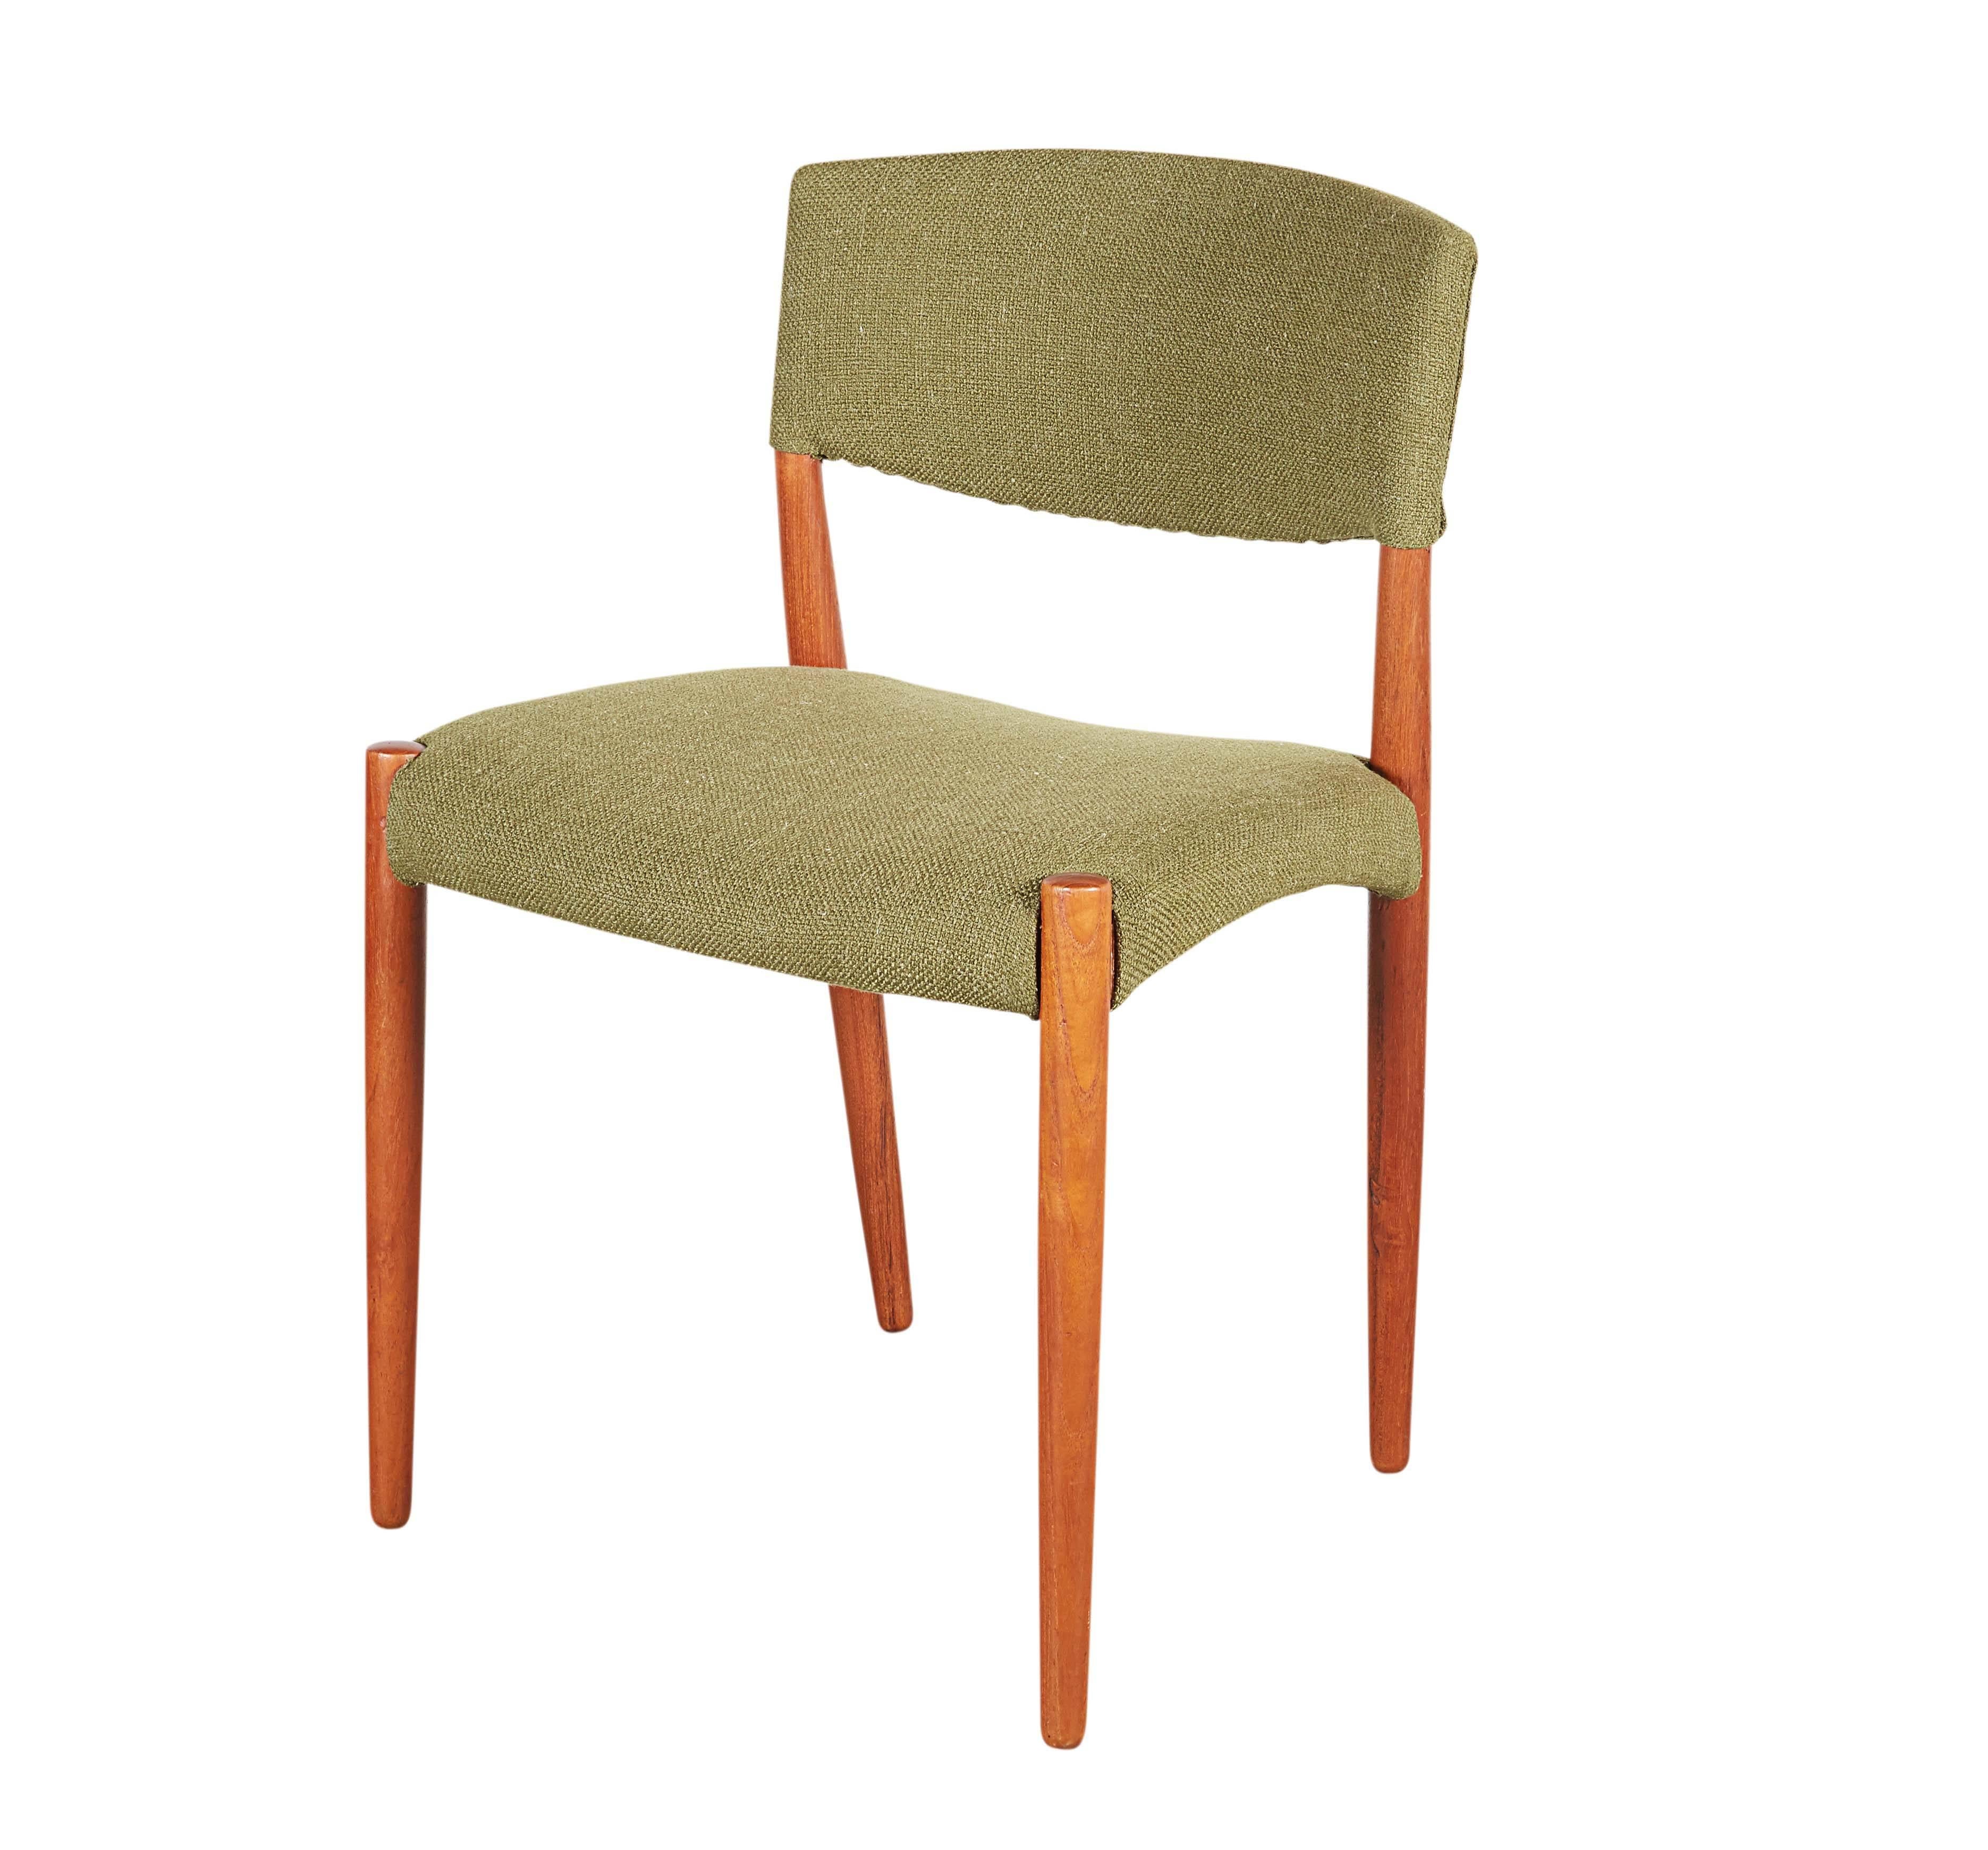 Mid Century Dining Chairs by Bender and Madsen, Set of 4

These Danish dining chairs are in excellent condition as well as very comfortable. A casual feel with elegant lines. Ready for pick up, delivery, or shipping anywhere in the world.